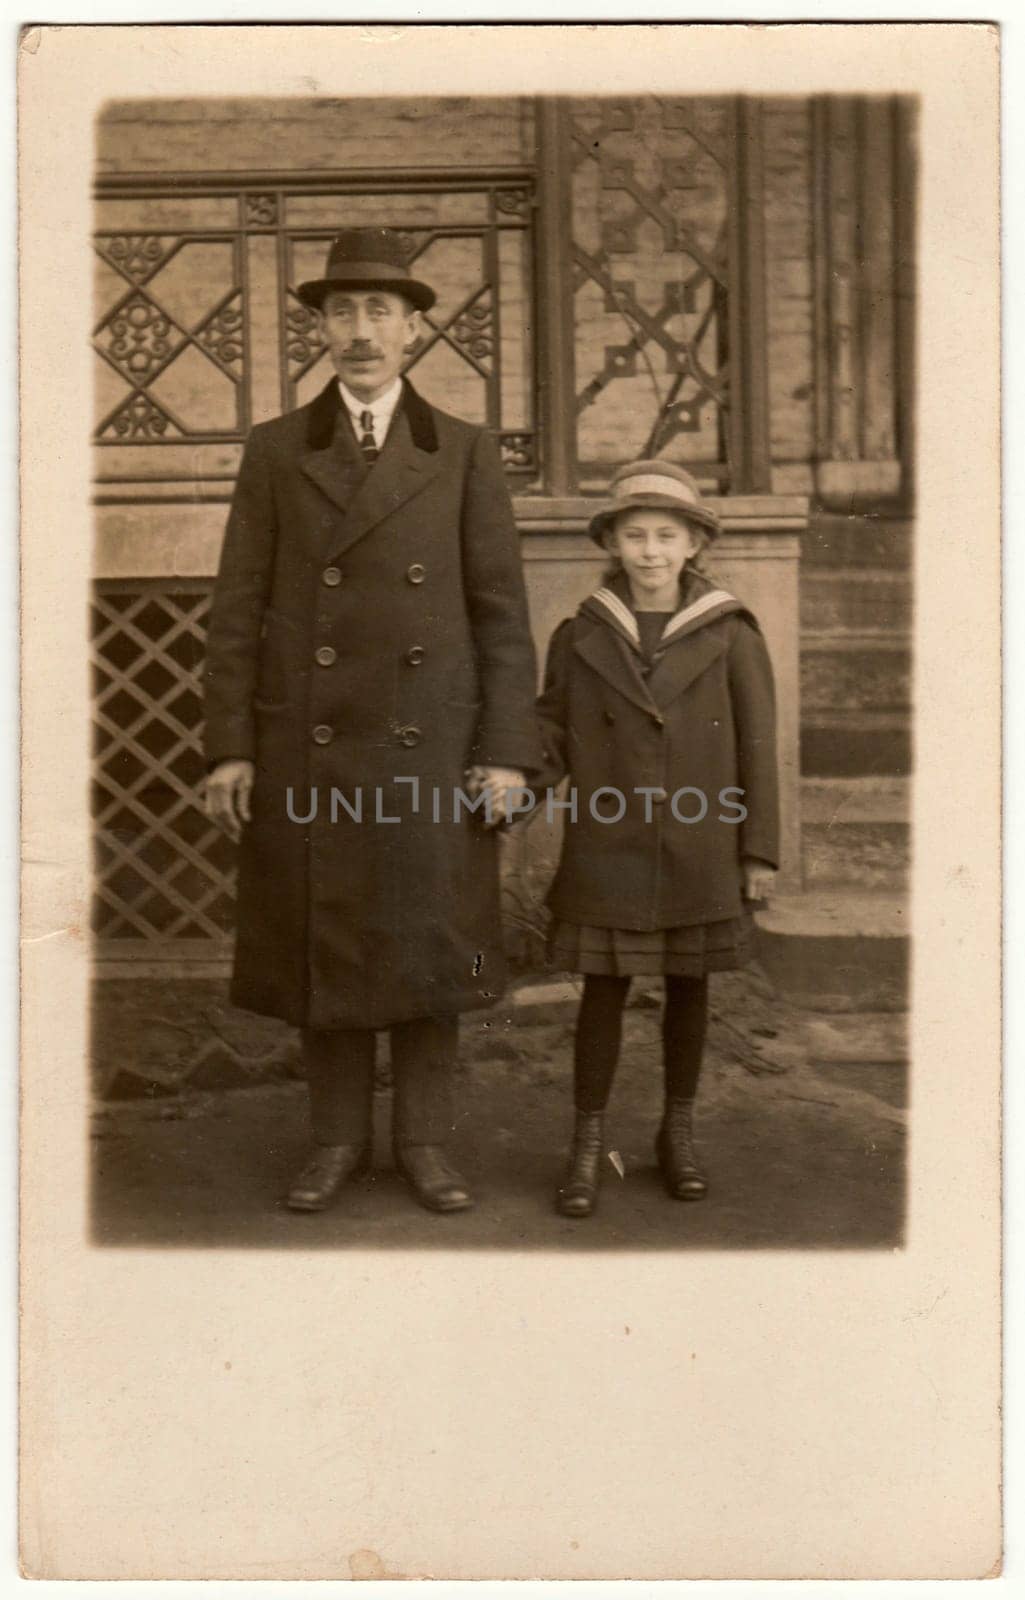 THE CZECHOSLOVAK REPUBLIC - CIRCA 1930s: Vintage photo shows father with daughter pose outdoors. Retro black and white photography.